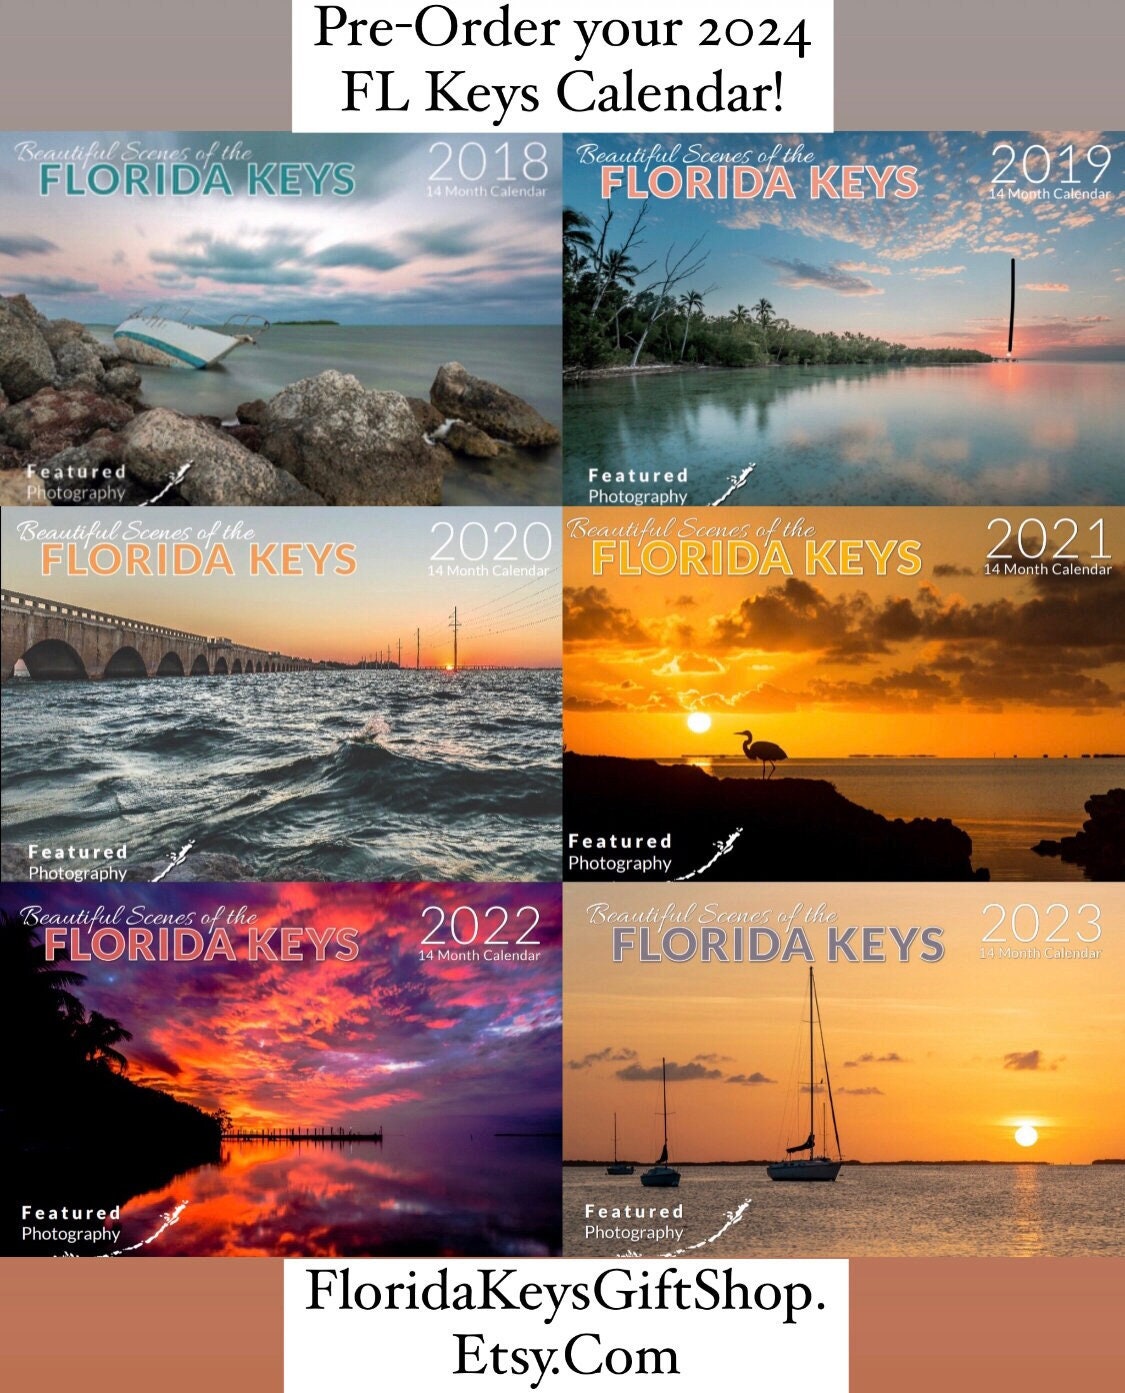 10 Best Souvenirs to Buy in Florida Keys - Discover Authentic Florida Keys  Gifts and Mementos – Go Guides